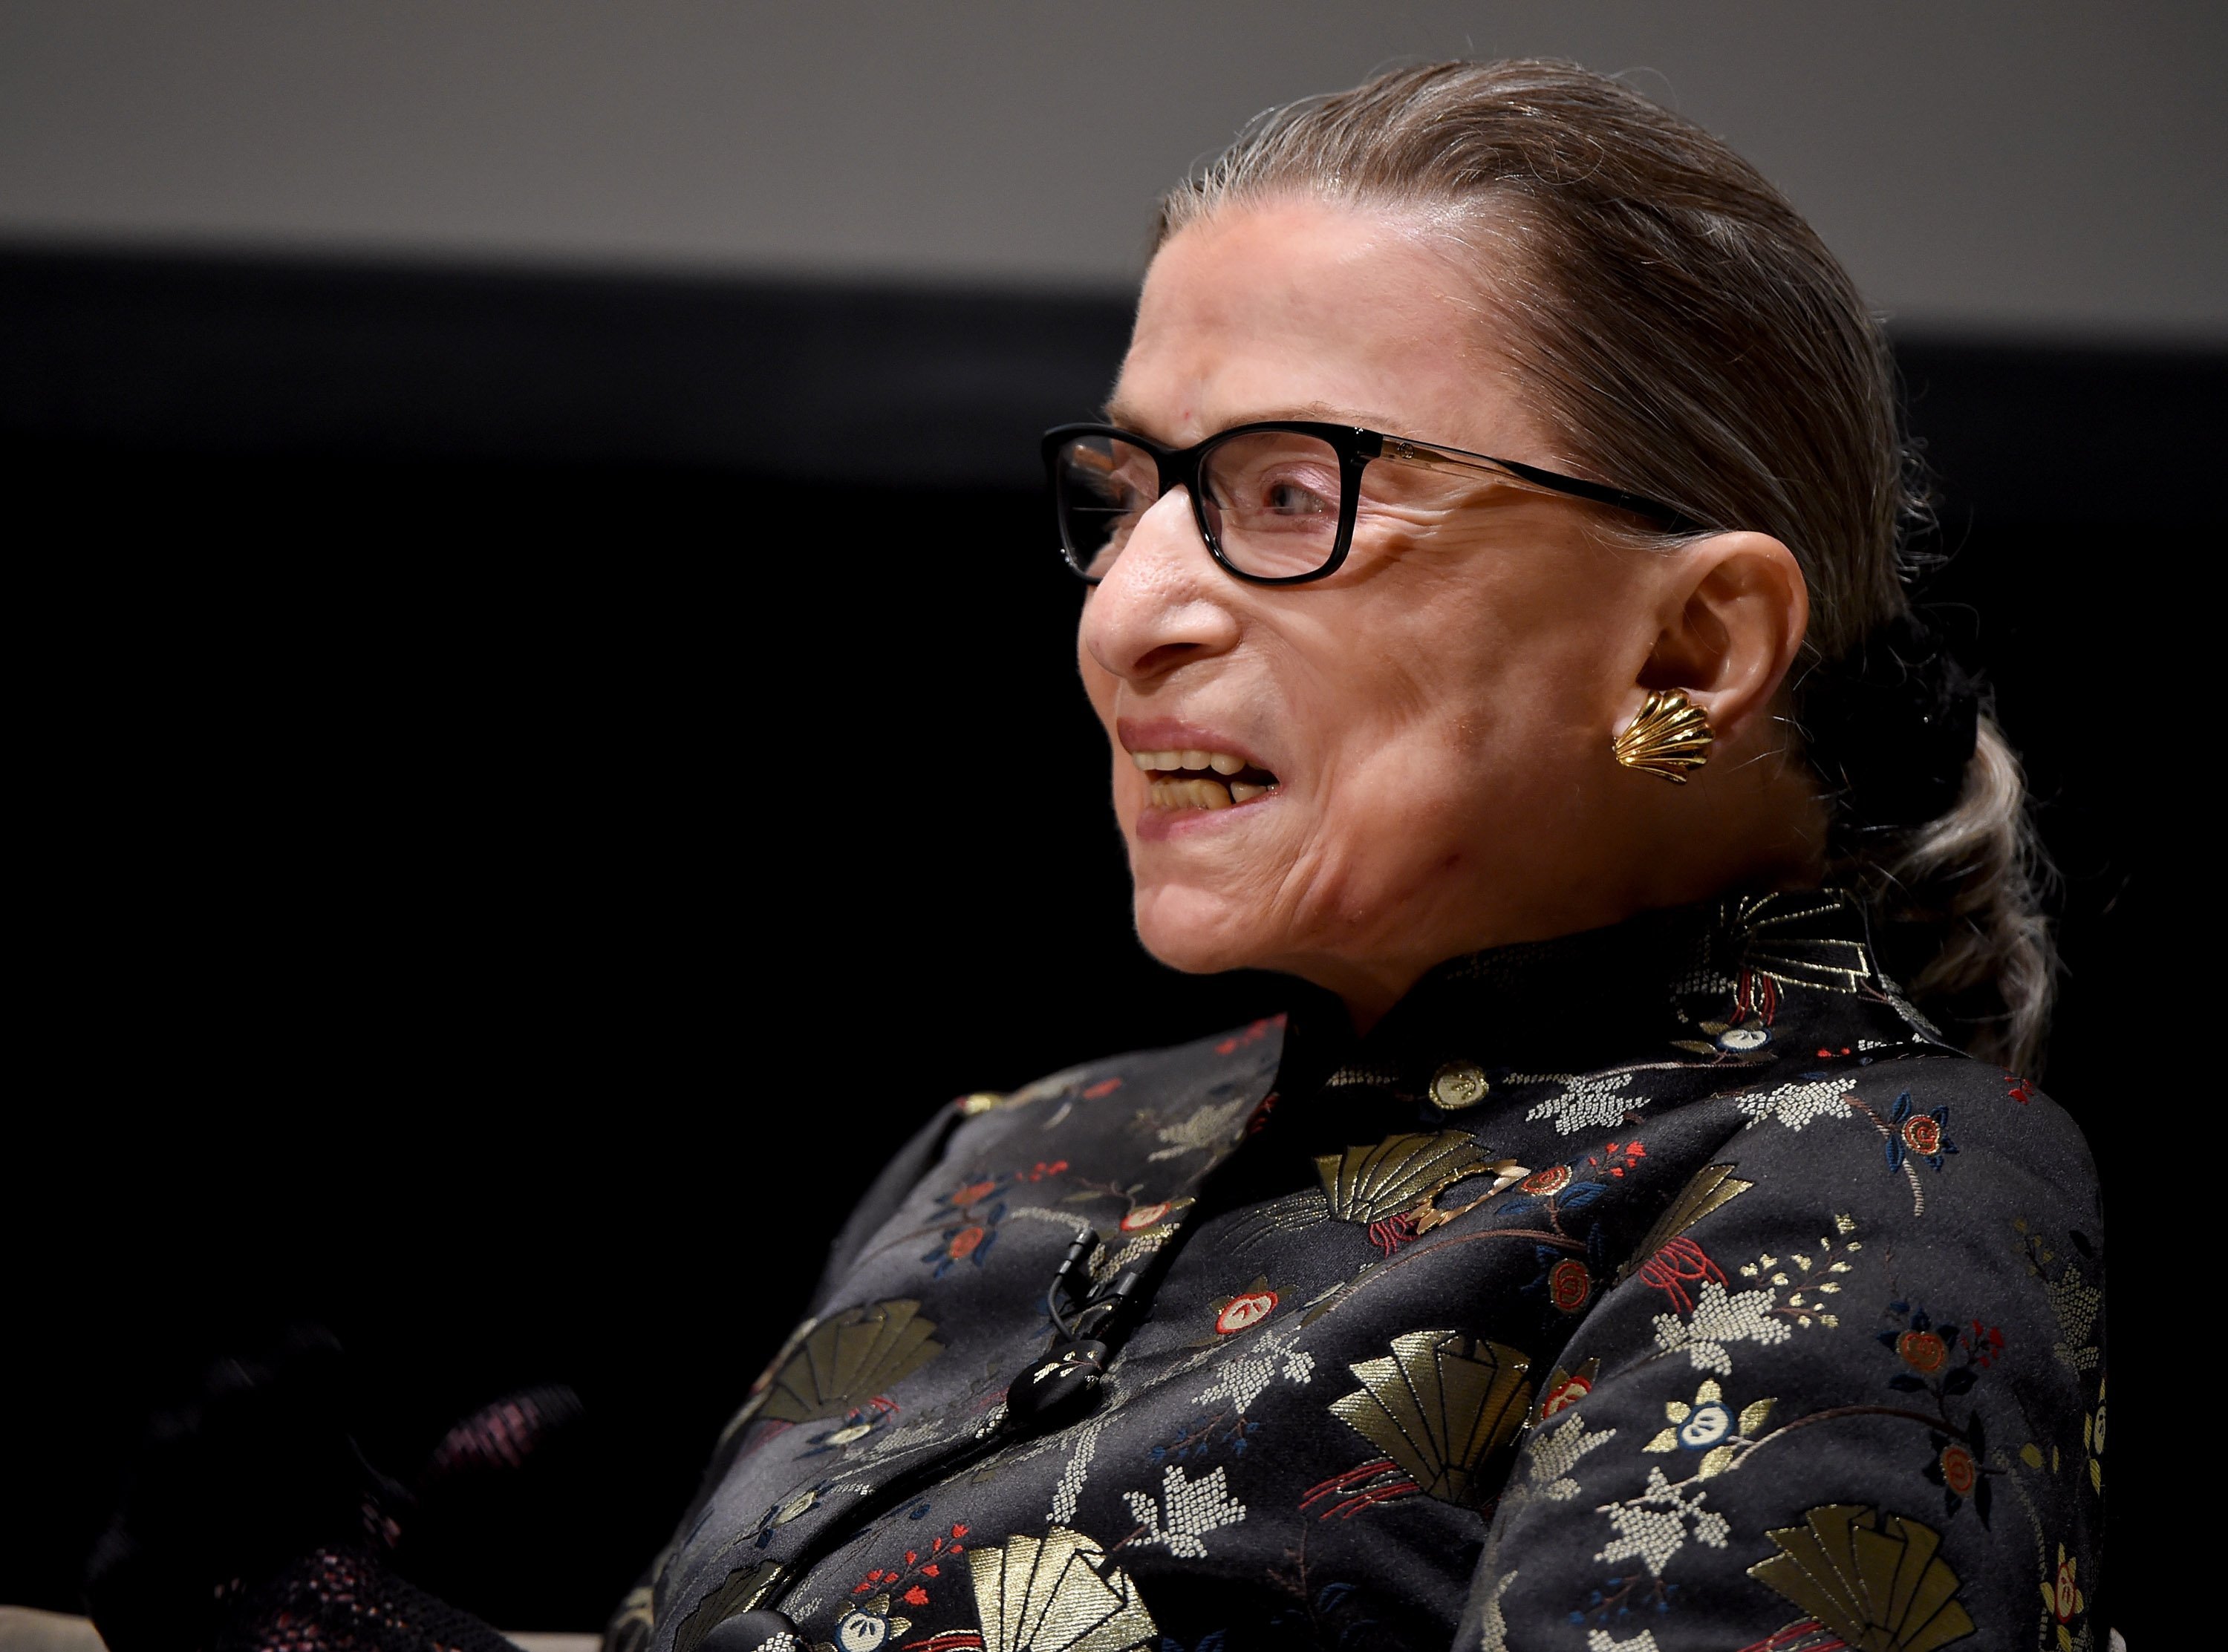 Supreme Court Justice Ruth Bader Ginsburg presents onstage at An Historic Evening with Supreme Court Justice Ruth Bader Ginsburg at the Temple Emanu-El Skirball Center on September 21, 2016 | Photo: GettyImages